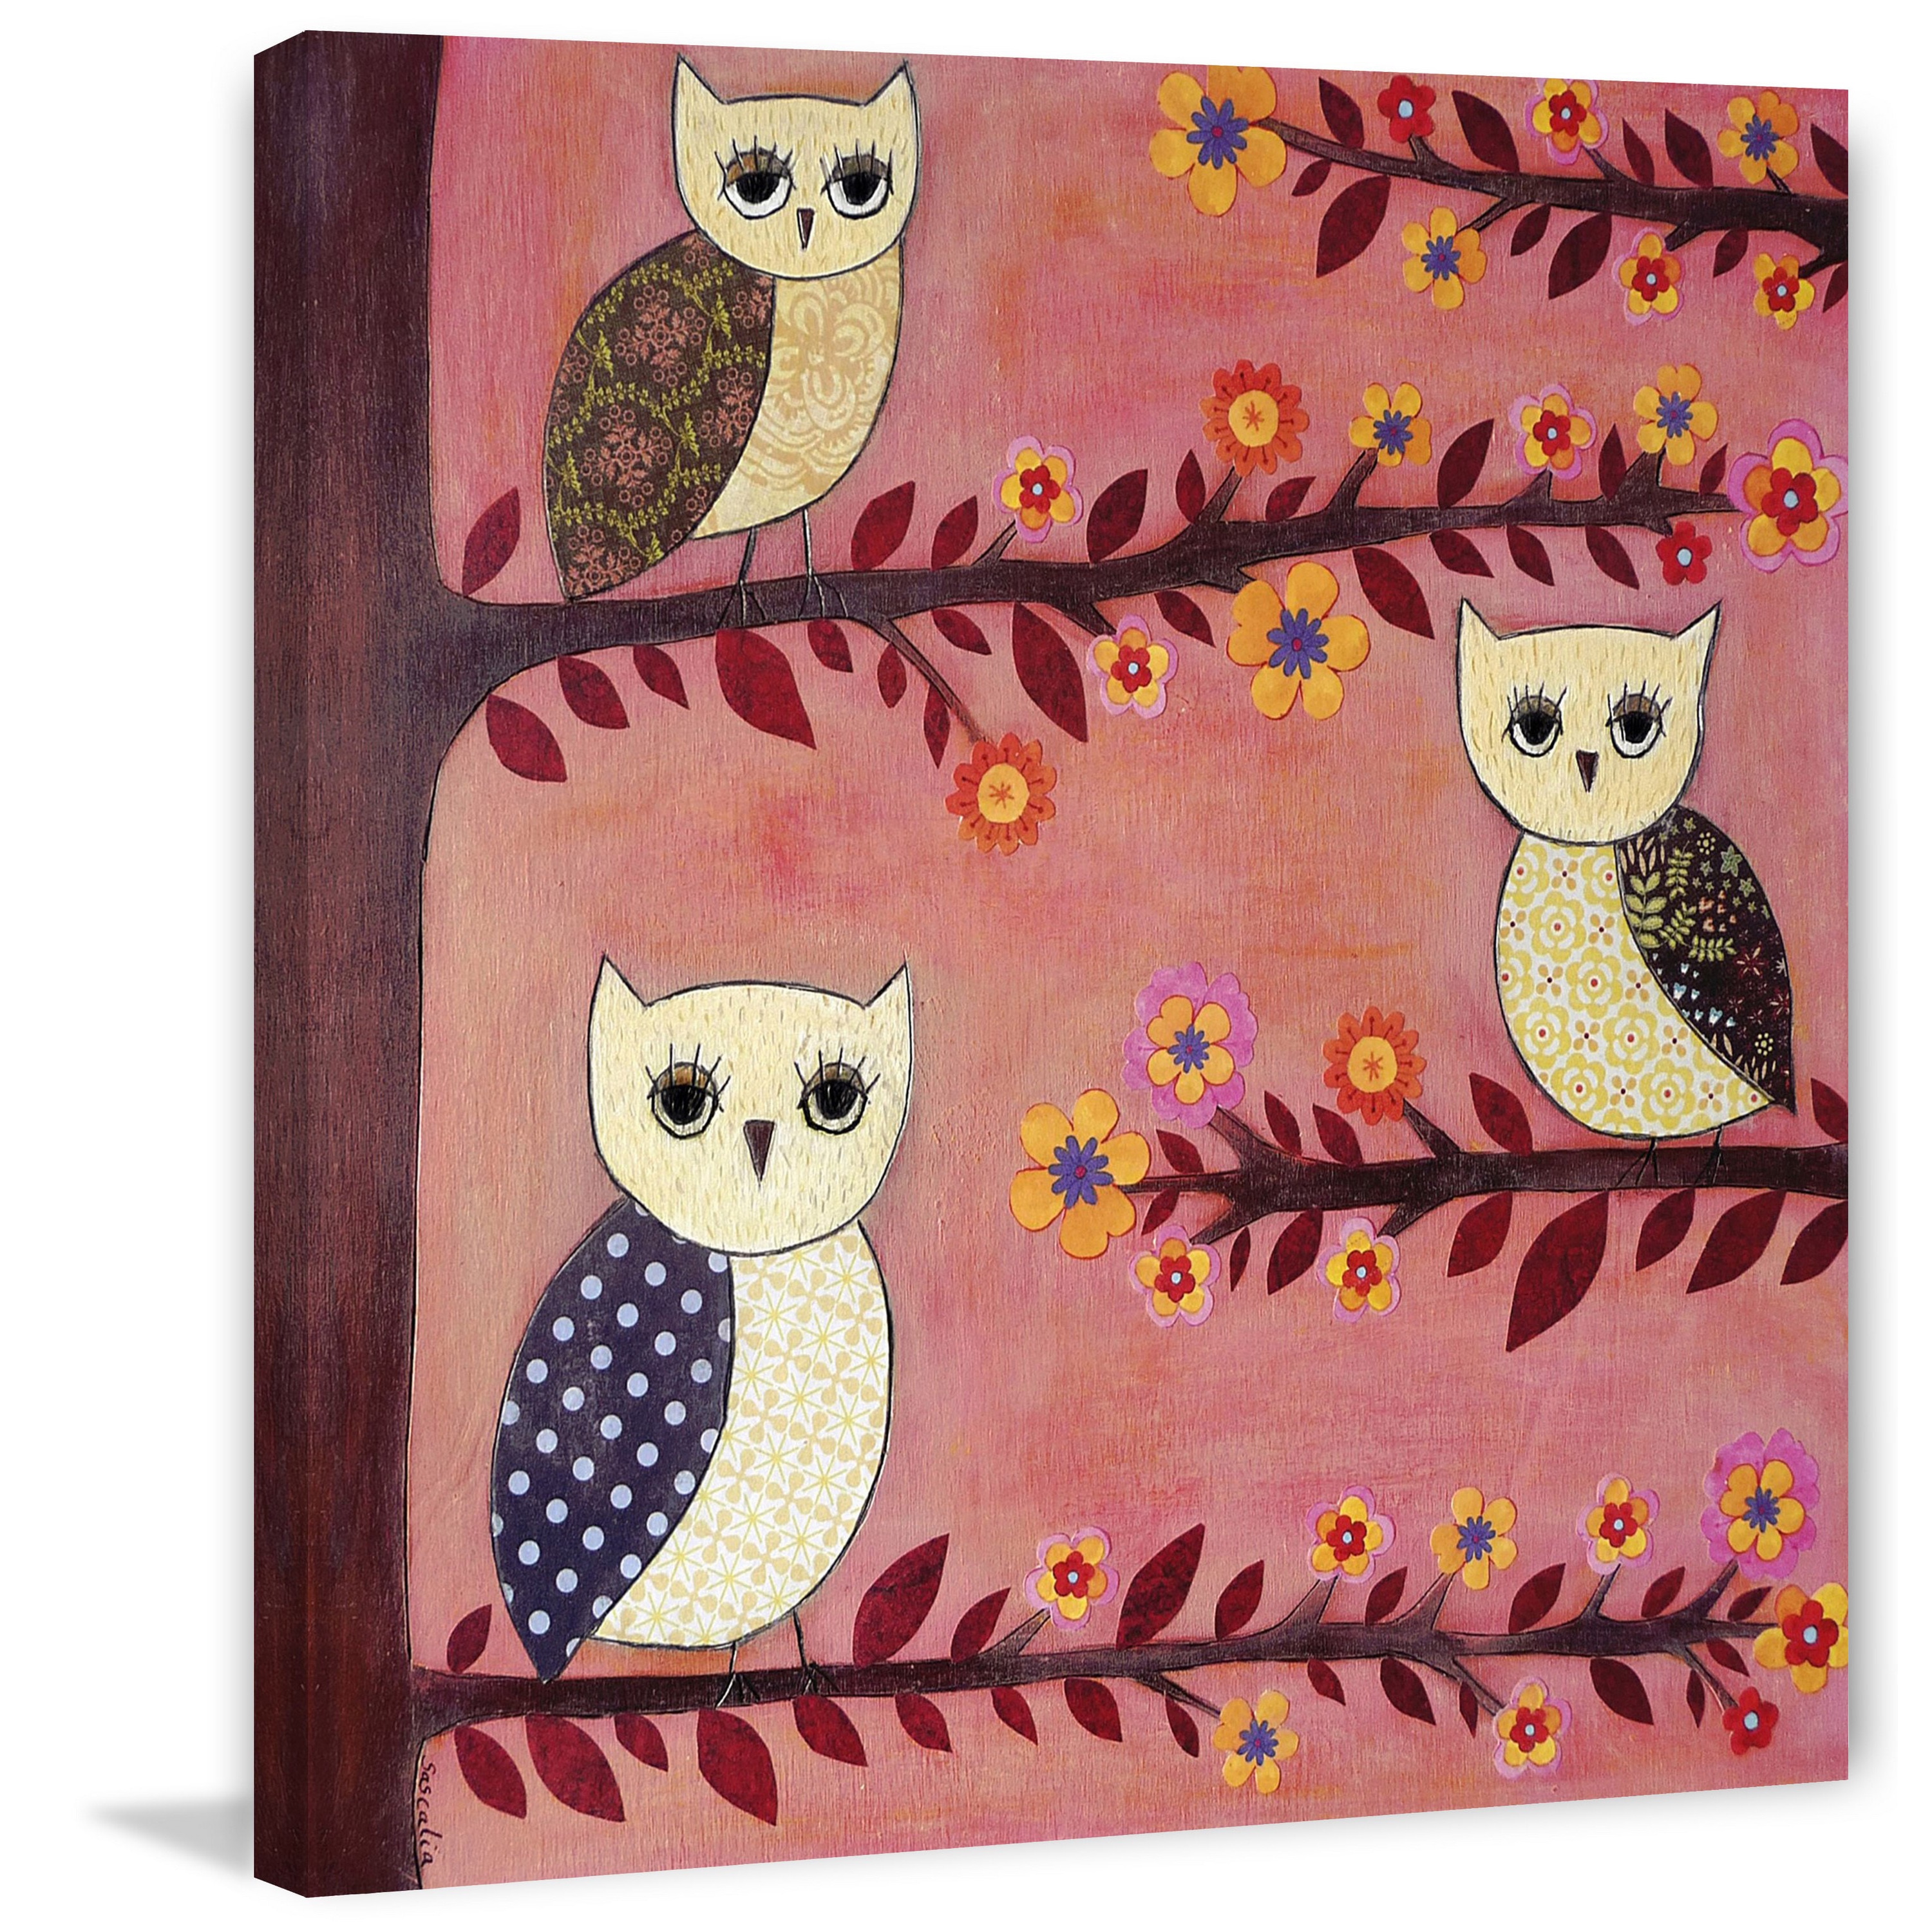 Marmont Hill - Handmade 3 Wise Owls Print on Wrapped Canvas